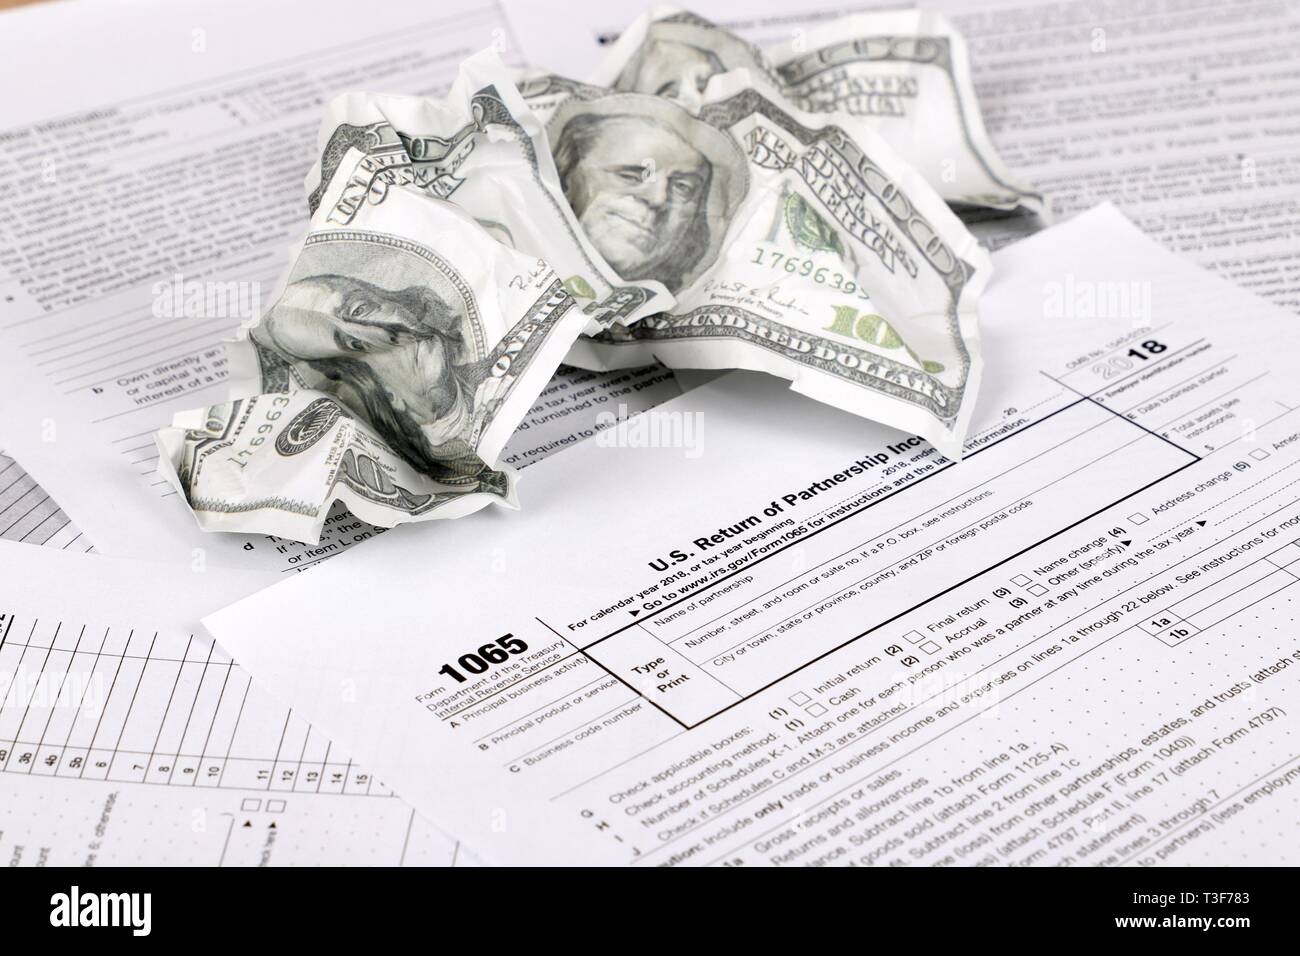 1065 tax form lies near crumpled hundred dollar bills on a Table. US Return for parentship income Stock Photo